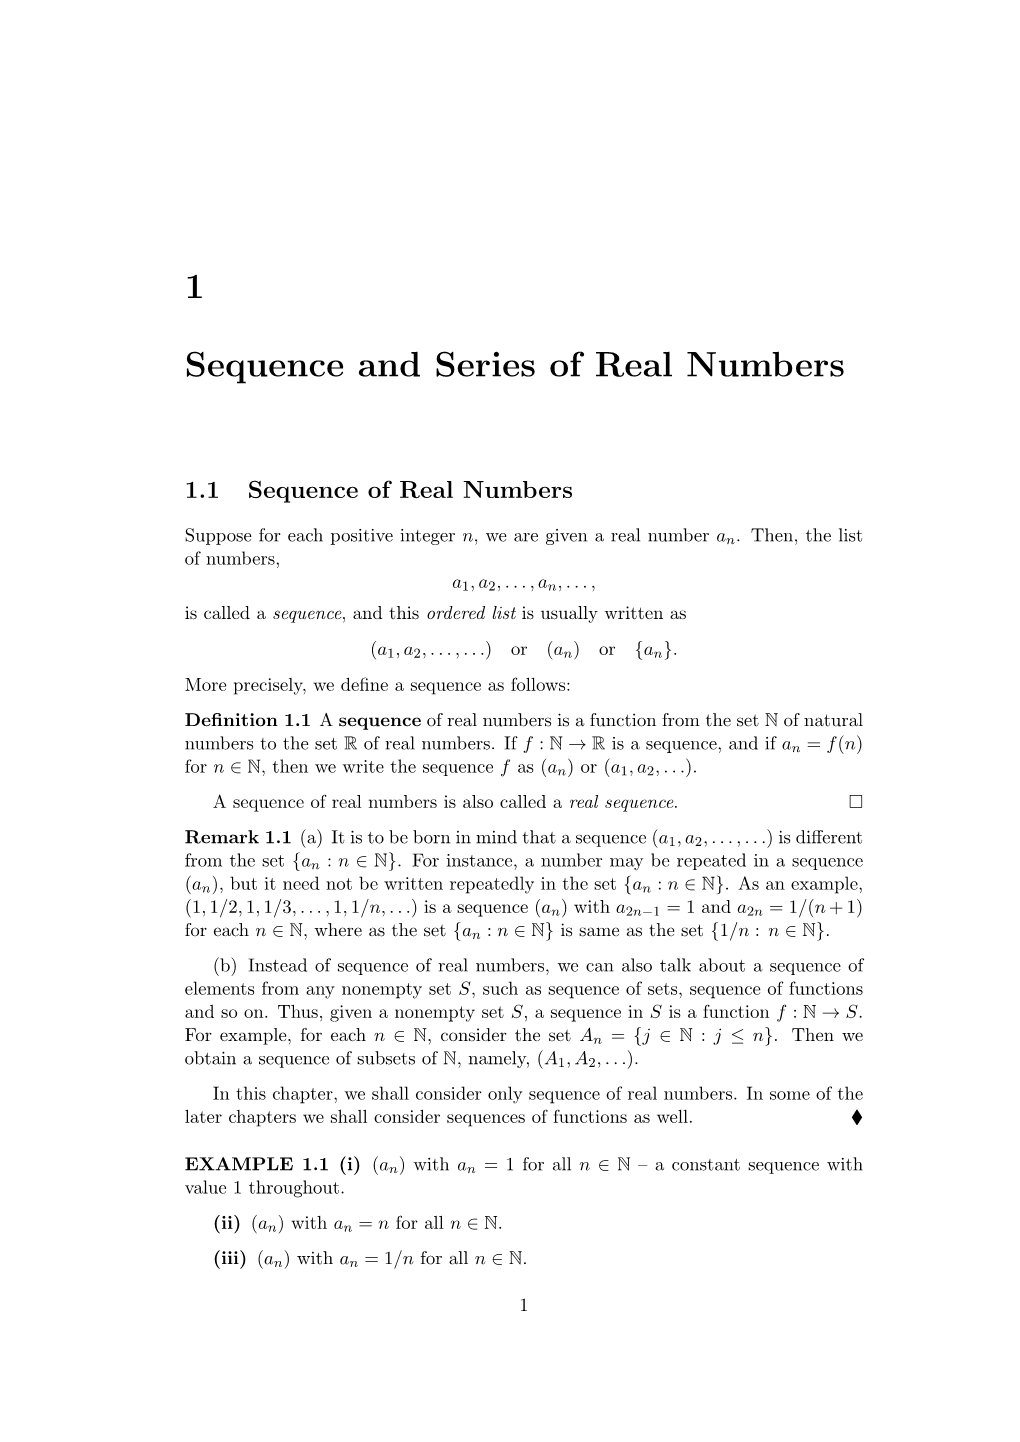 1 Sequence and Series of Real Numbers